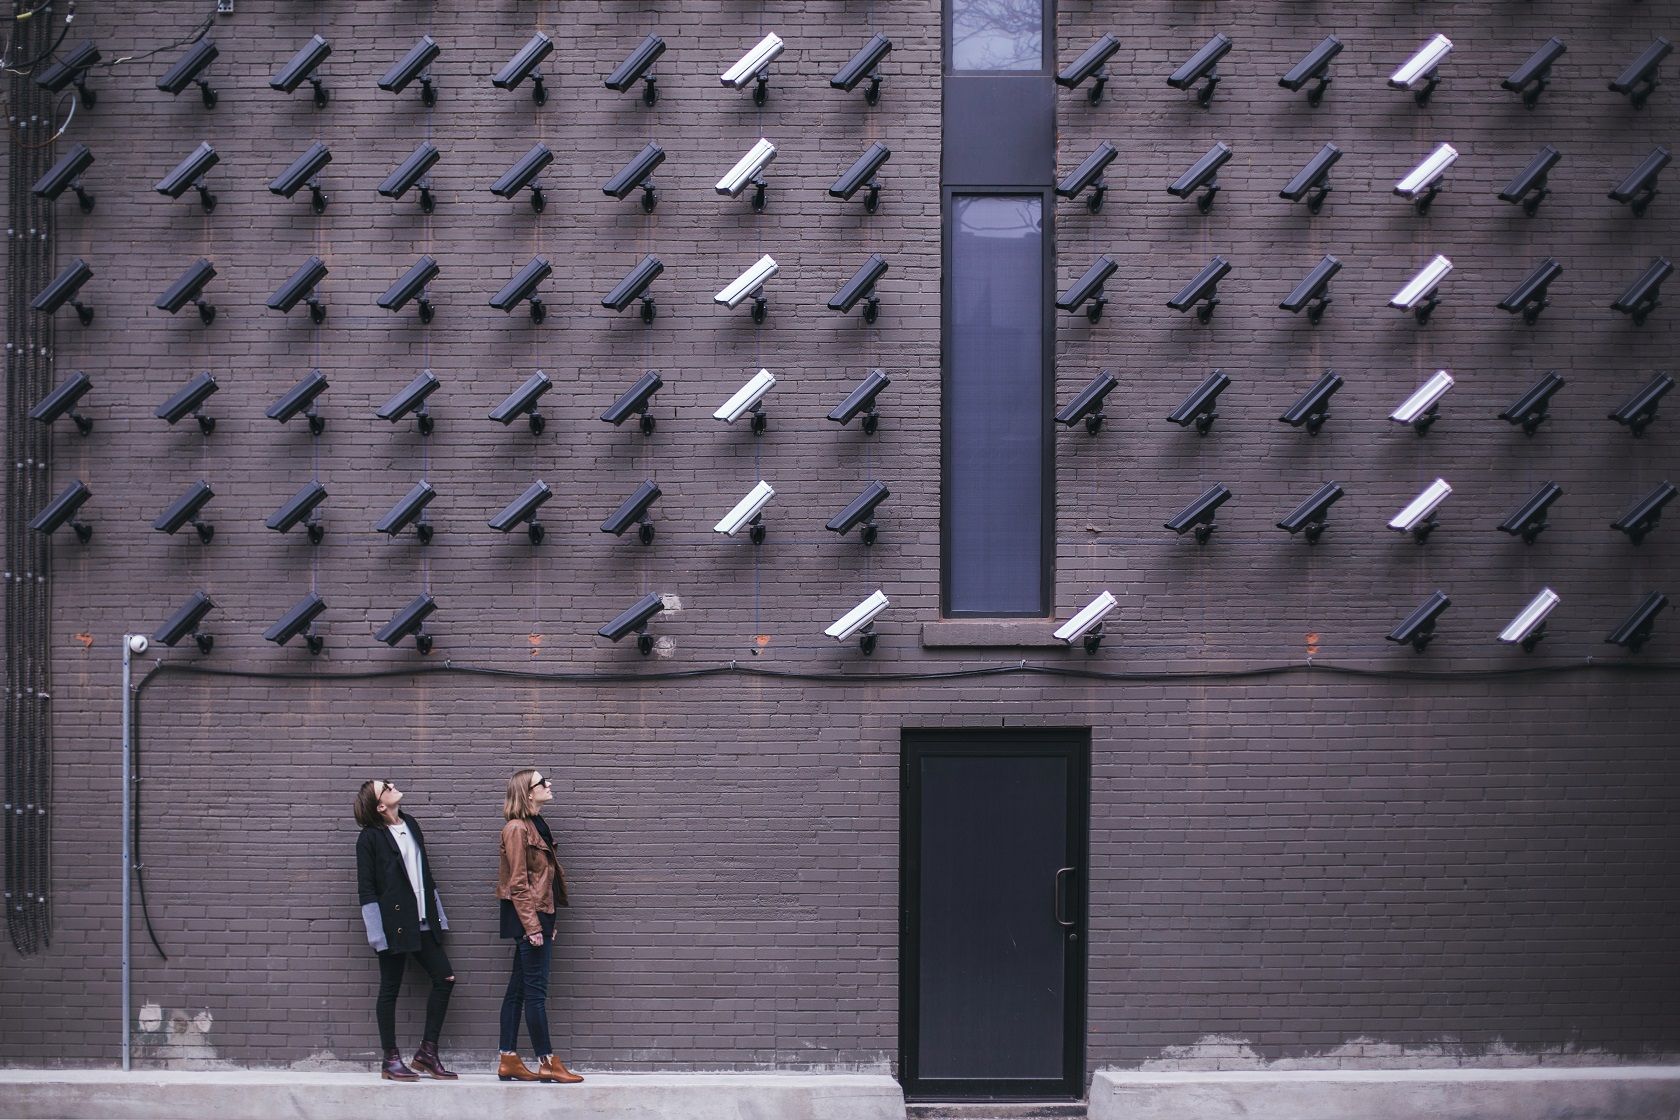 Two women looking up at many security cameras